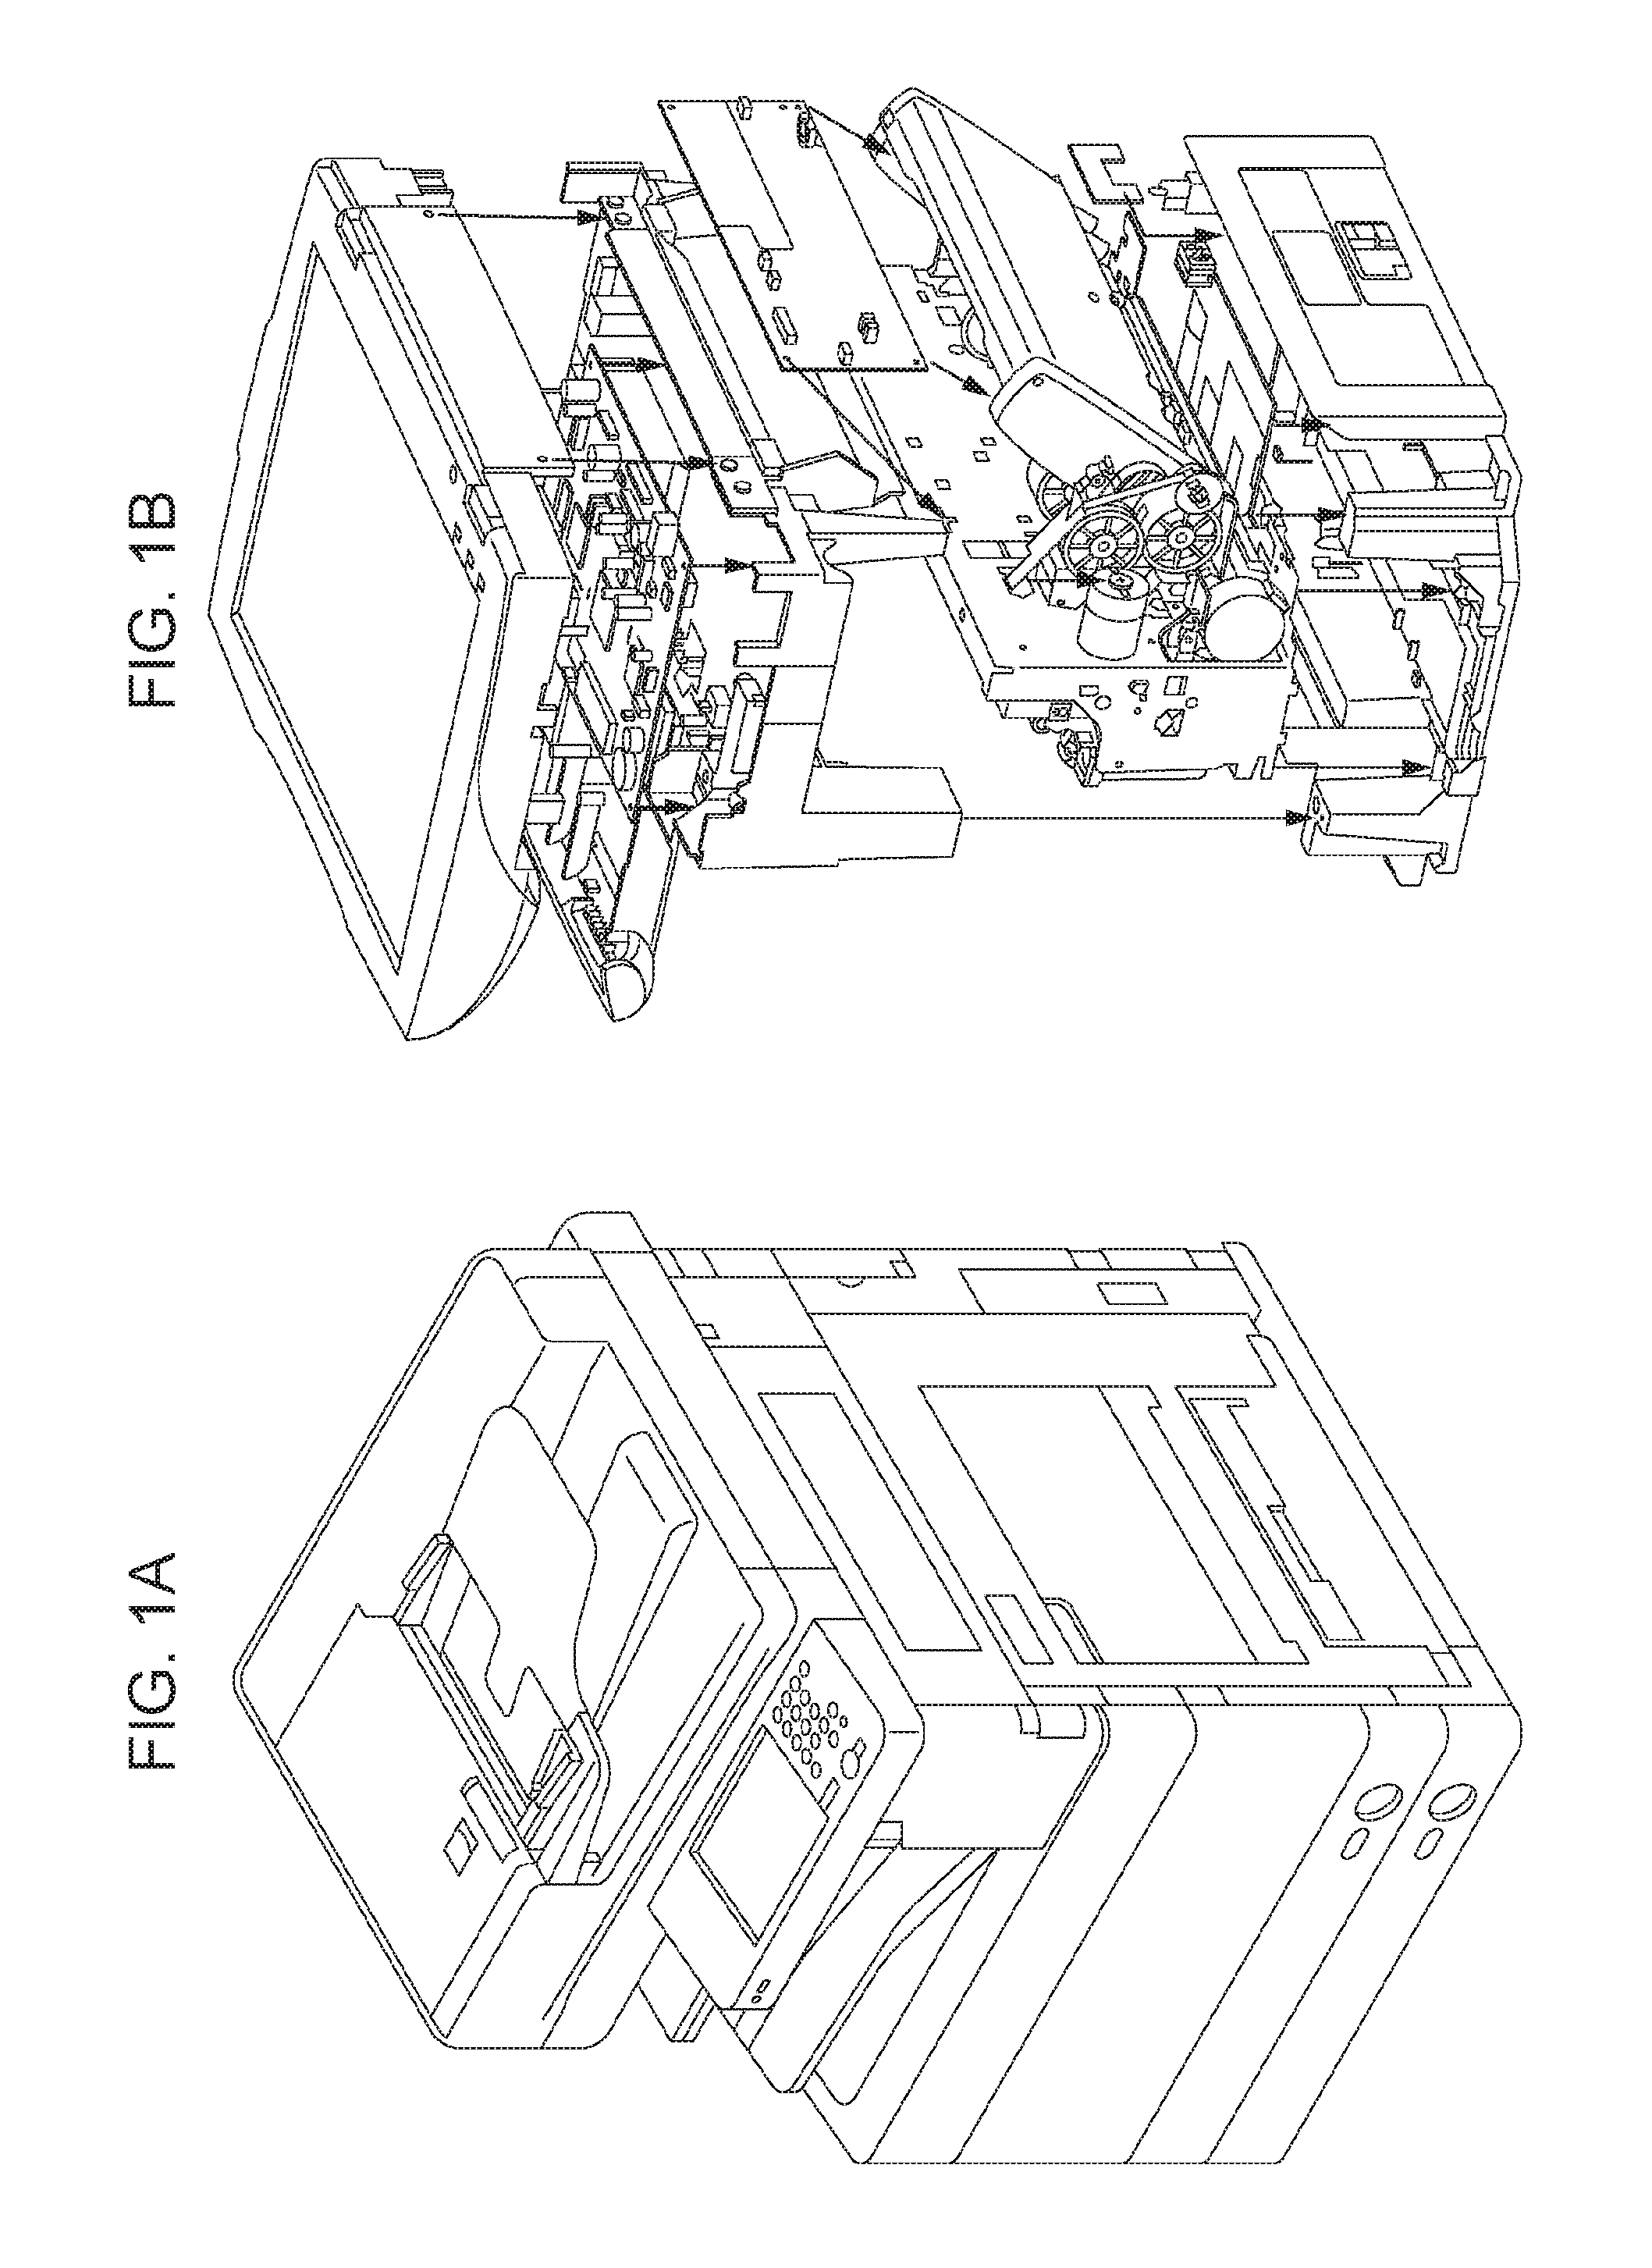 Flame retardant composition and molded article including the same